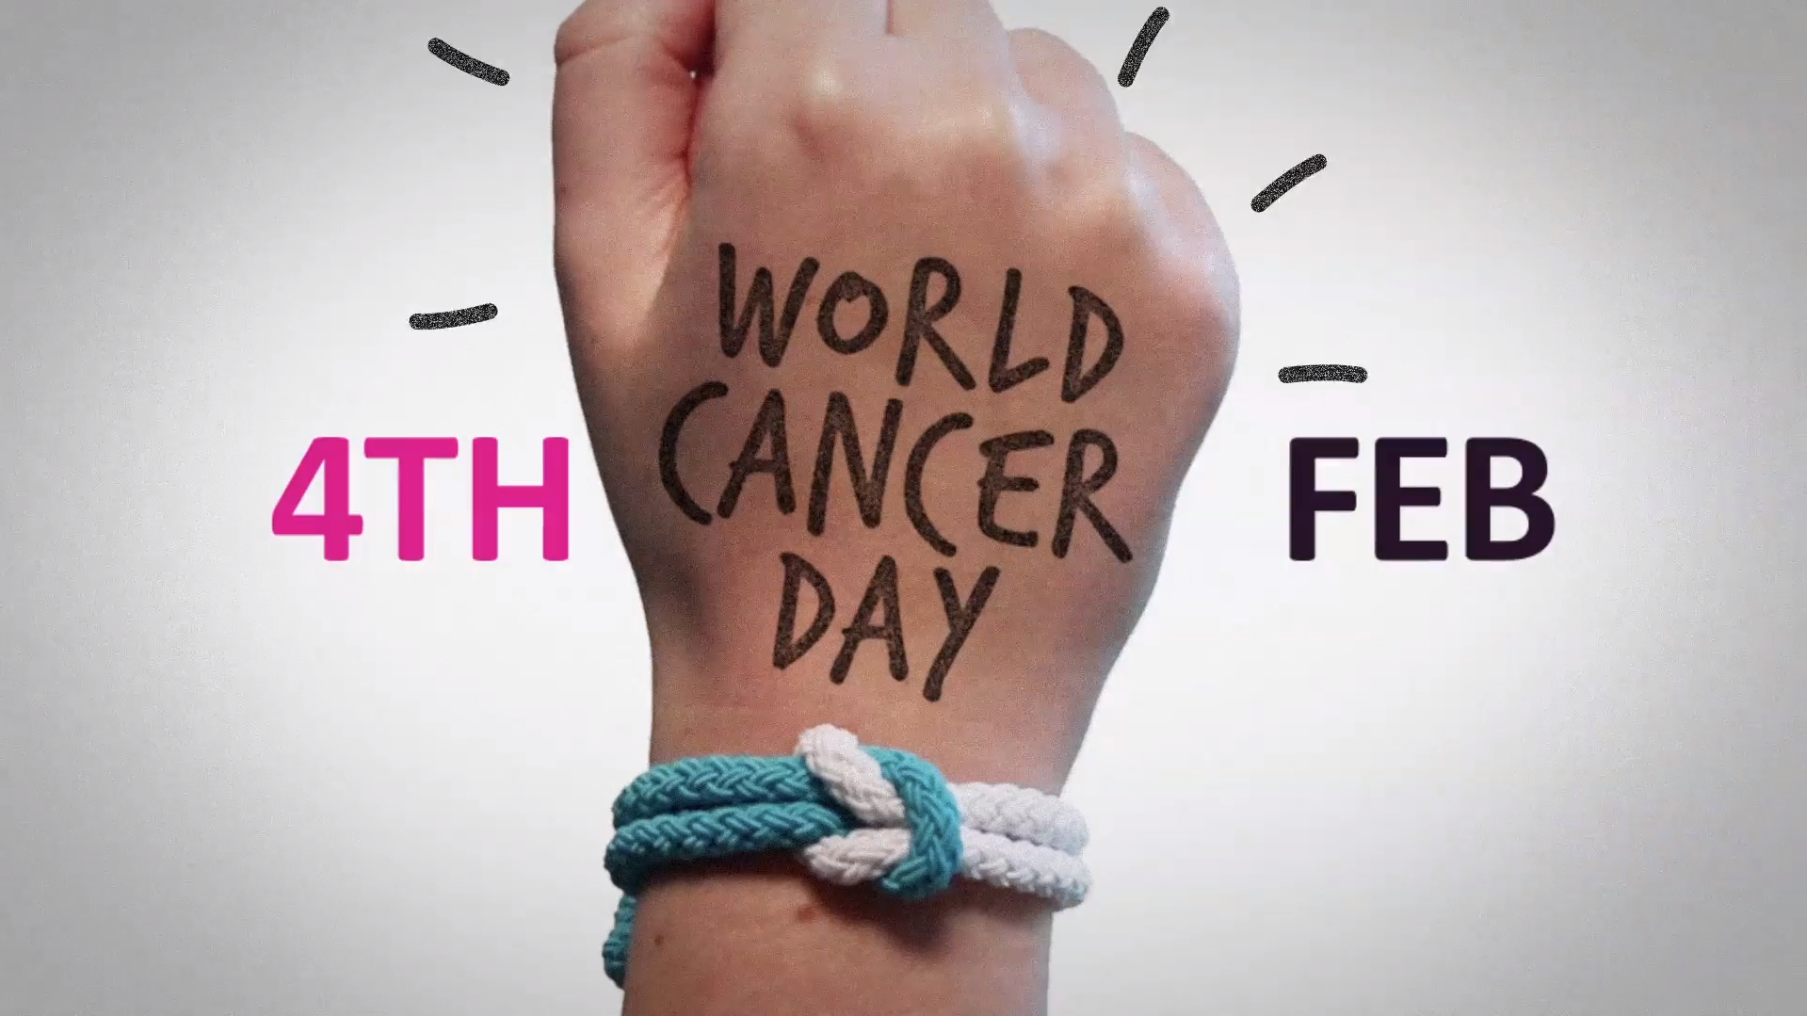 Cancer Research UK - World Cancer Day